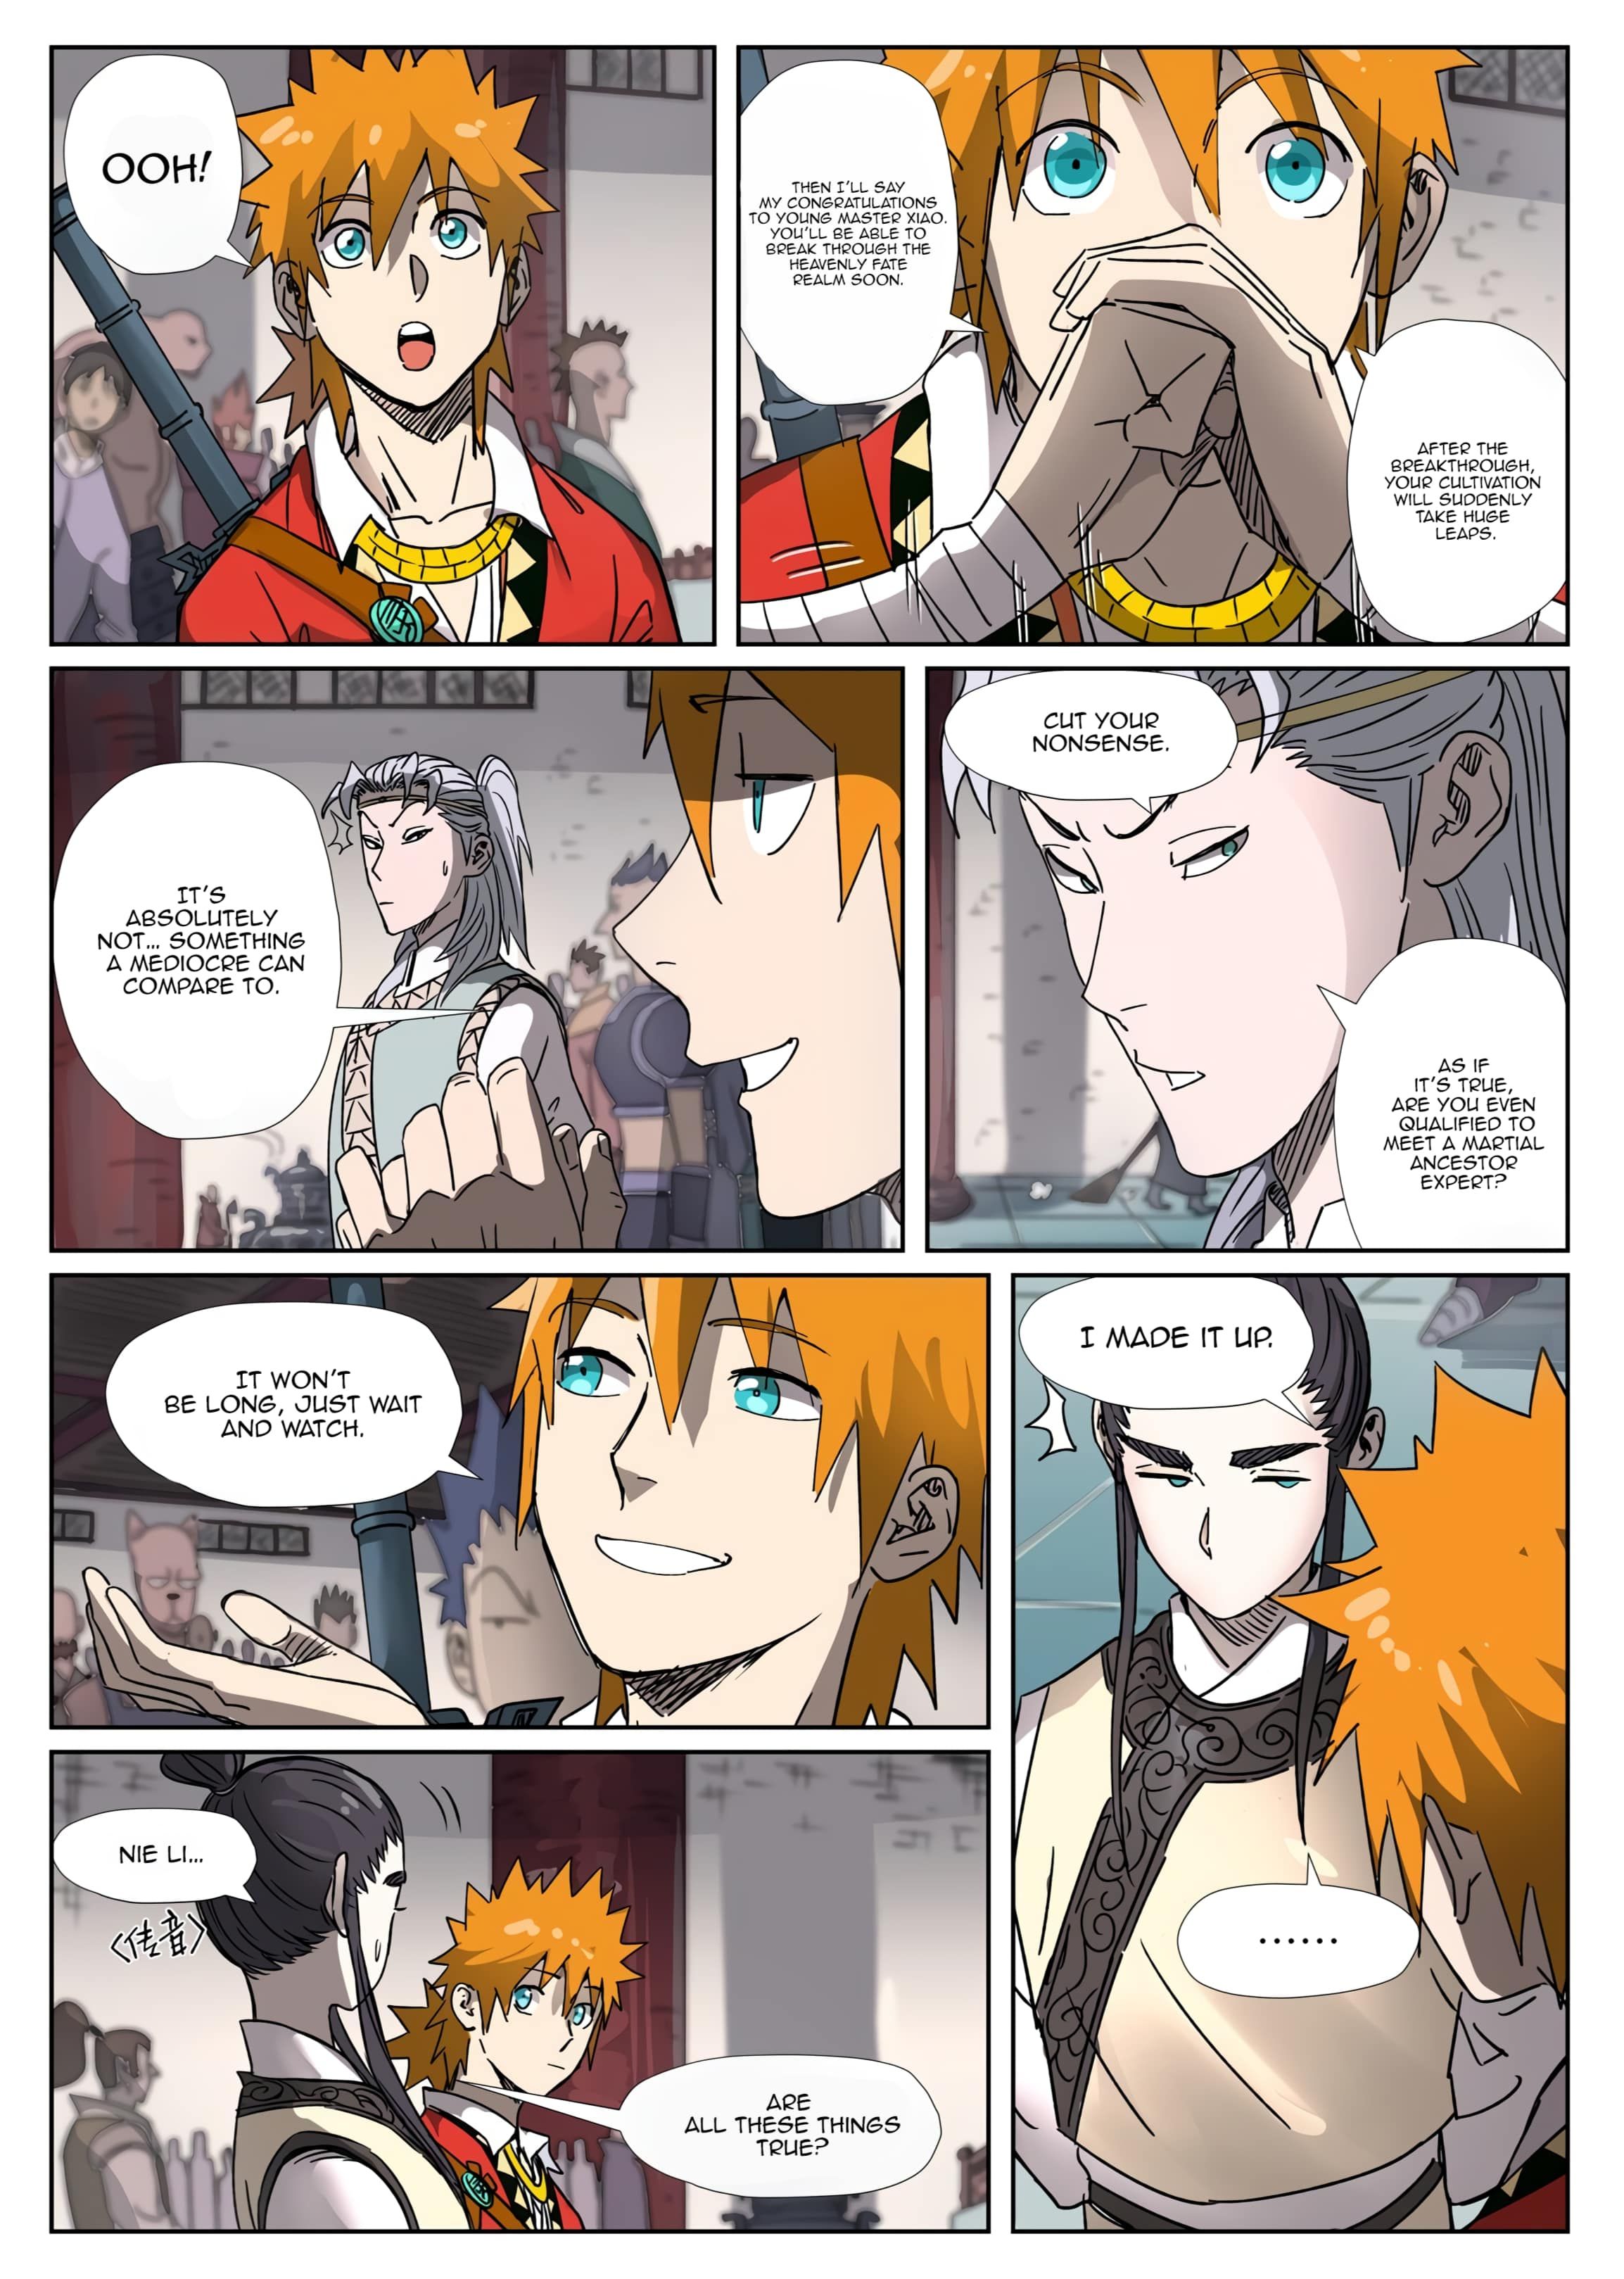 Tales of Demons and Gods Manhua Chapter 299.5 - Page 4